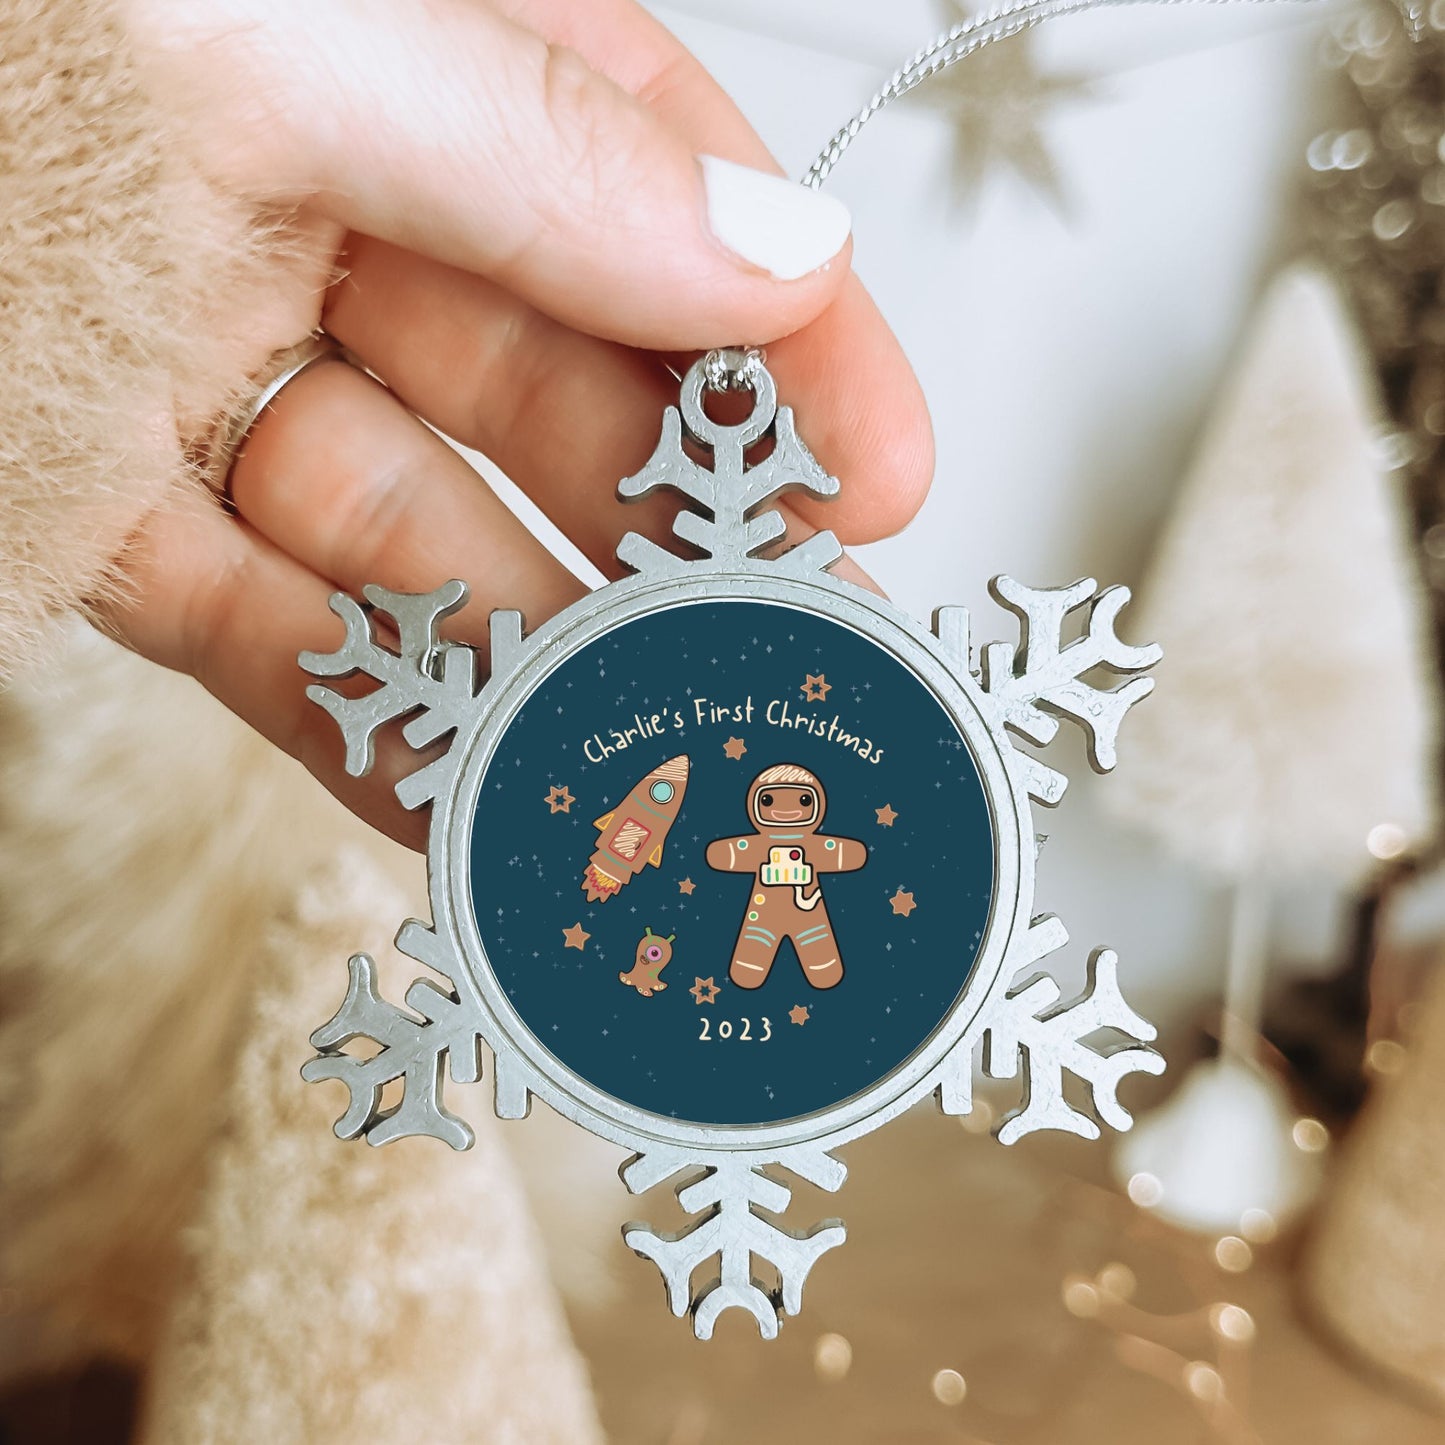 Personalised Pewter Snowflake Ornament | Gingerbread Astronaut